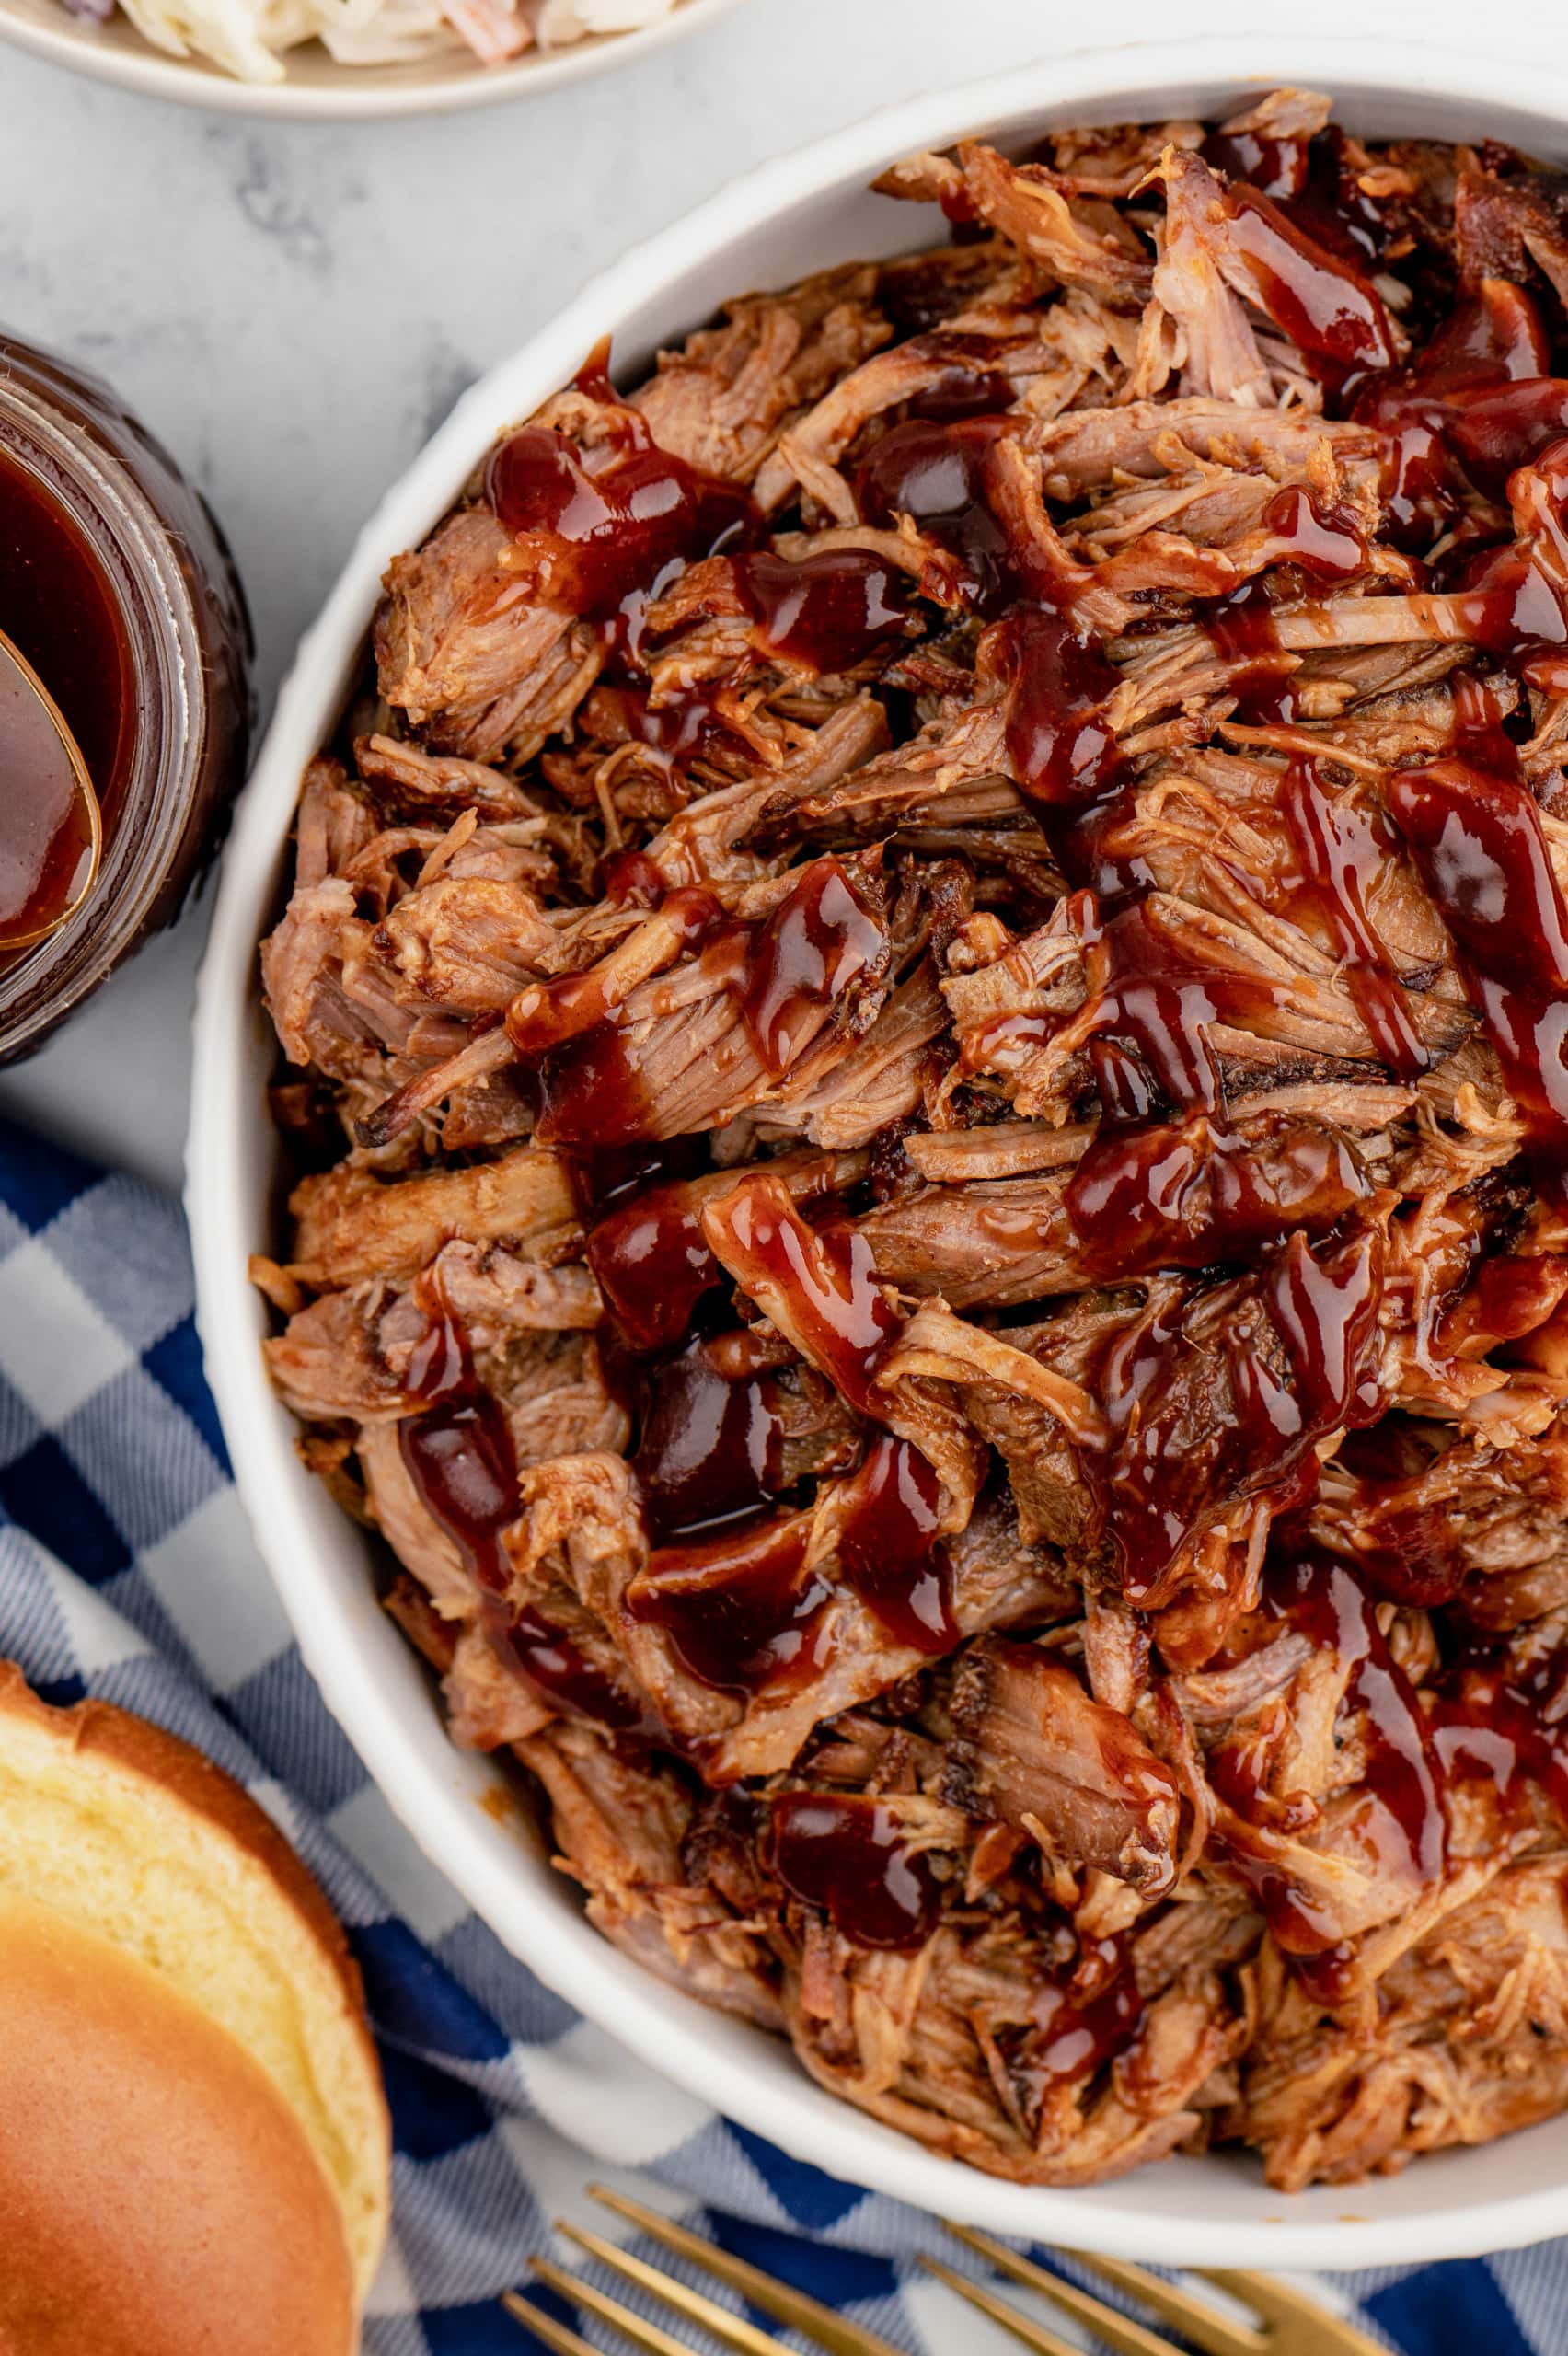 https://www.mommyhatescooking.com/wp-content/uploads/2022/05/Slow-cooker-pulled-pork-22-scaled.jpg